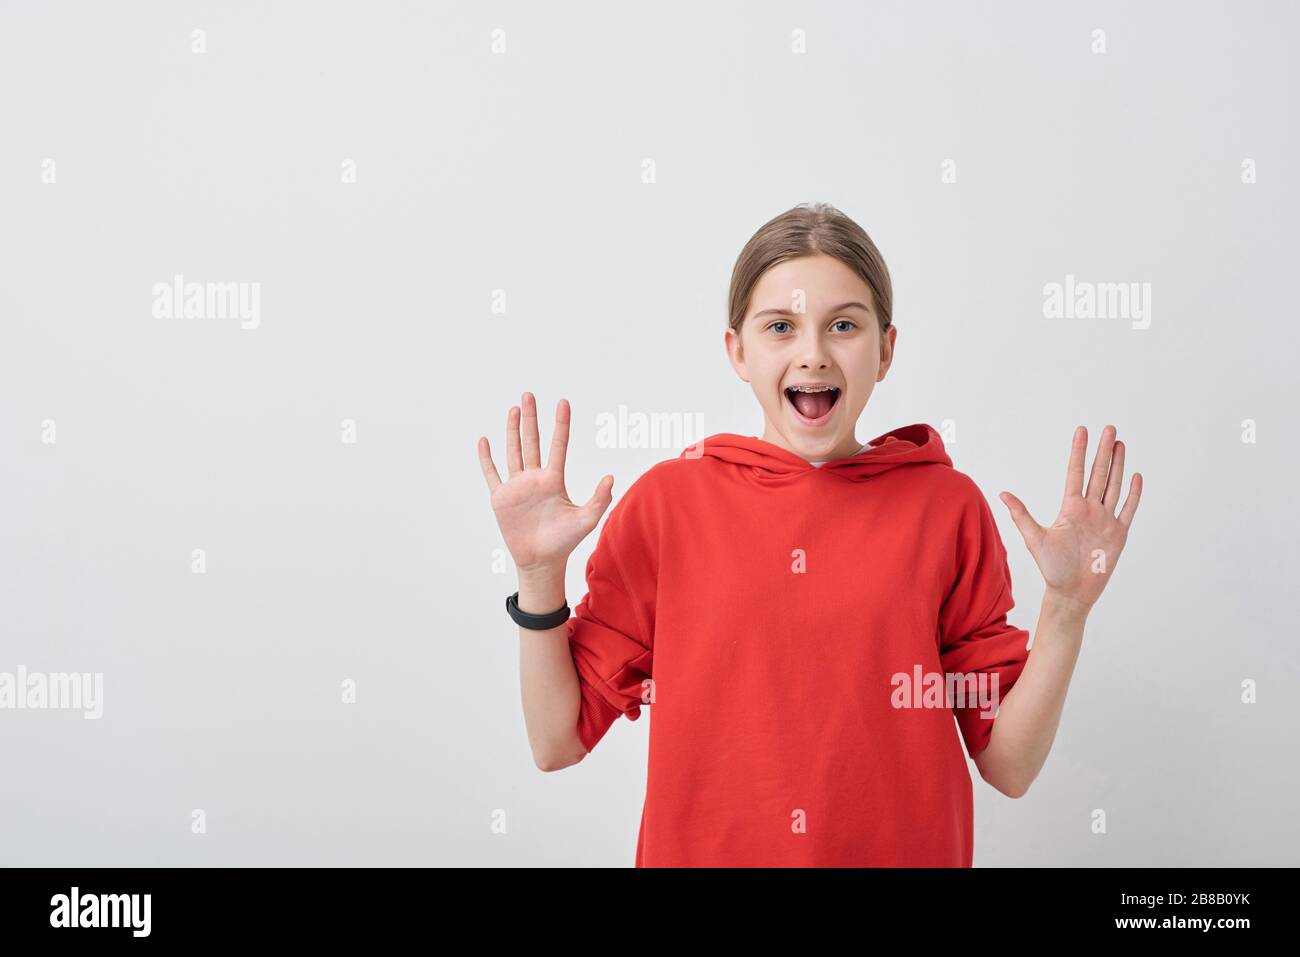 Friendly and cheerful teenage girl in red sweatshirt looking at you with her palms open and expressing gladness over white background Stock Photo